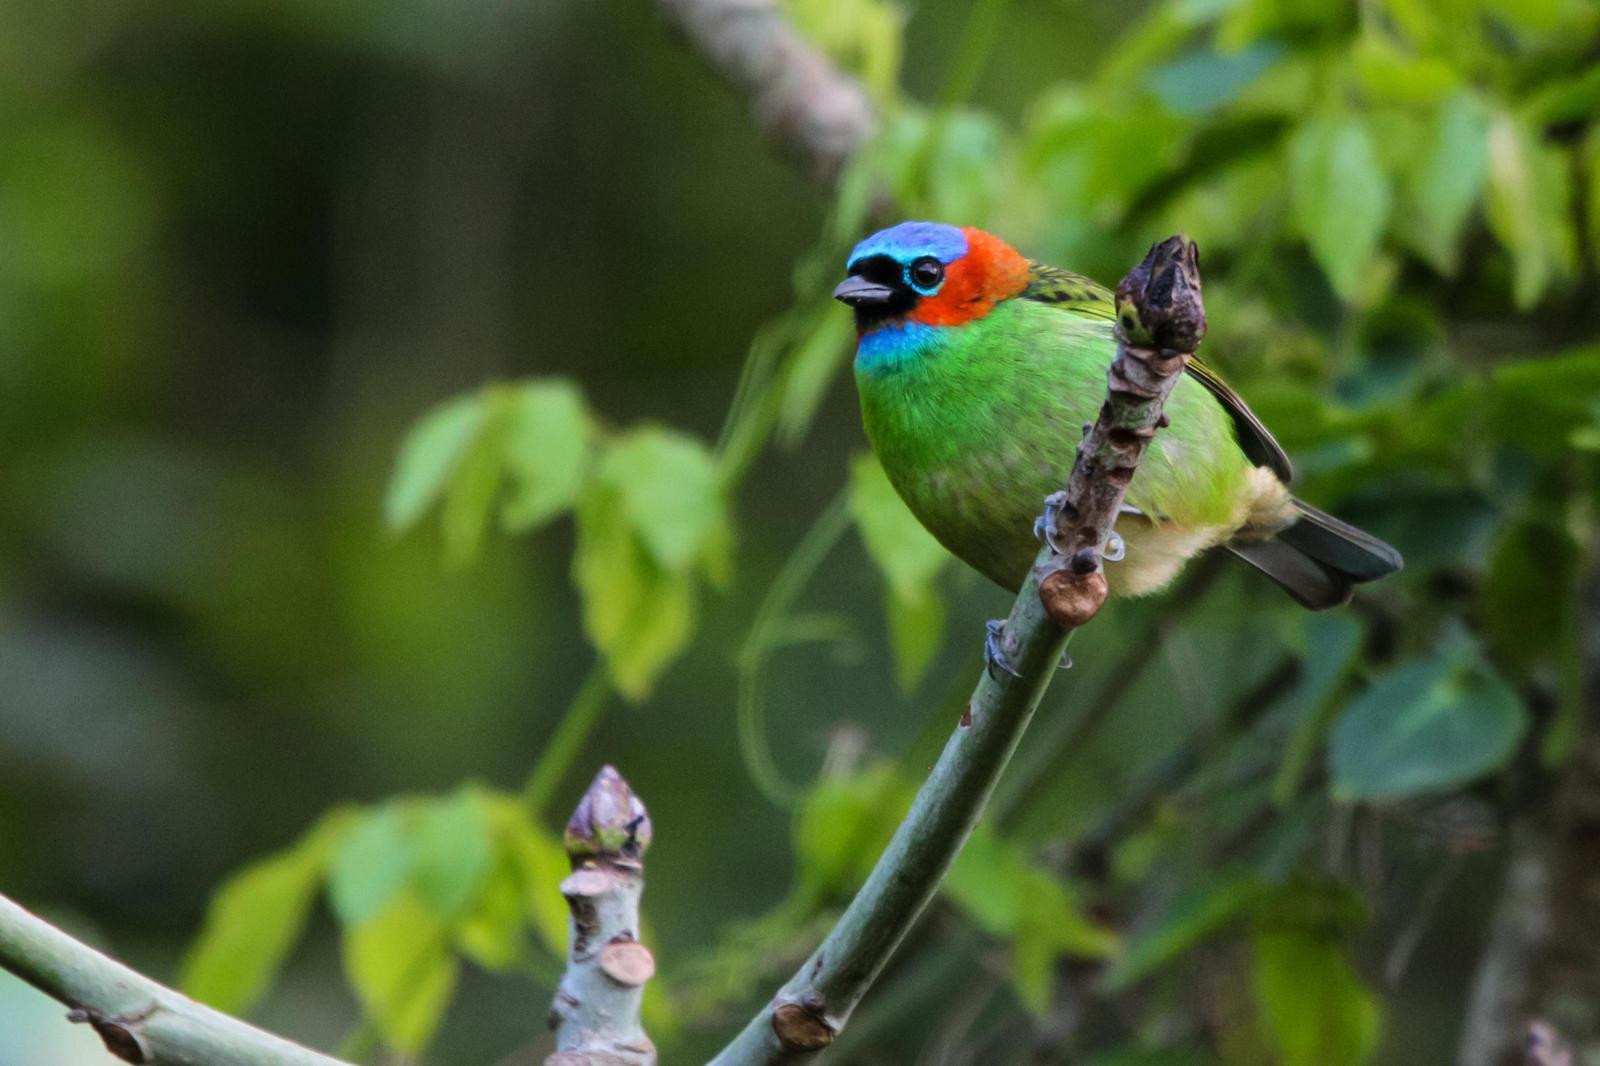 Red-necked Tanager Photo by Zé Edu Camargo